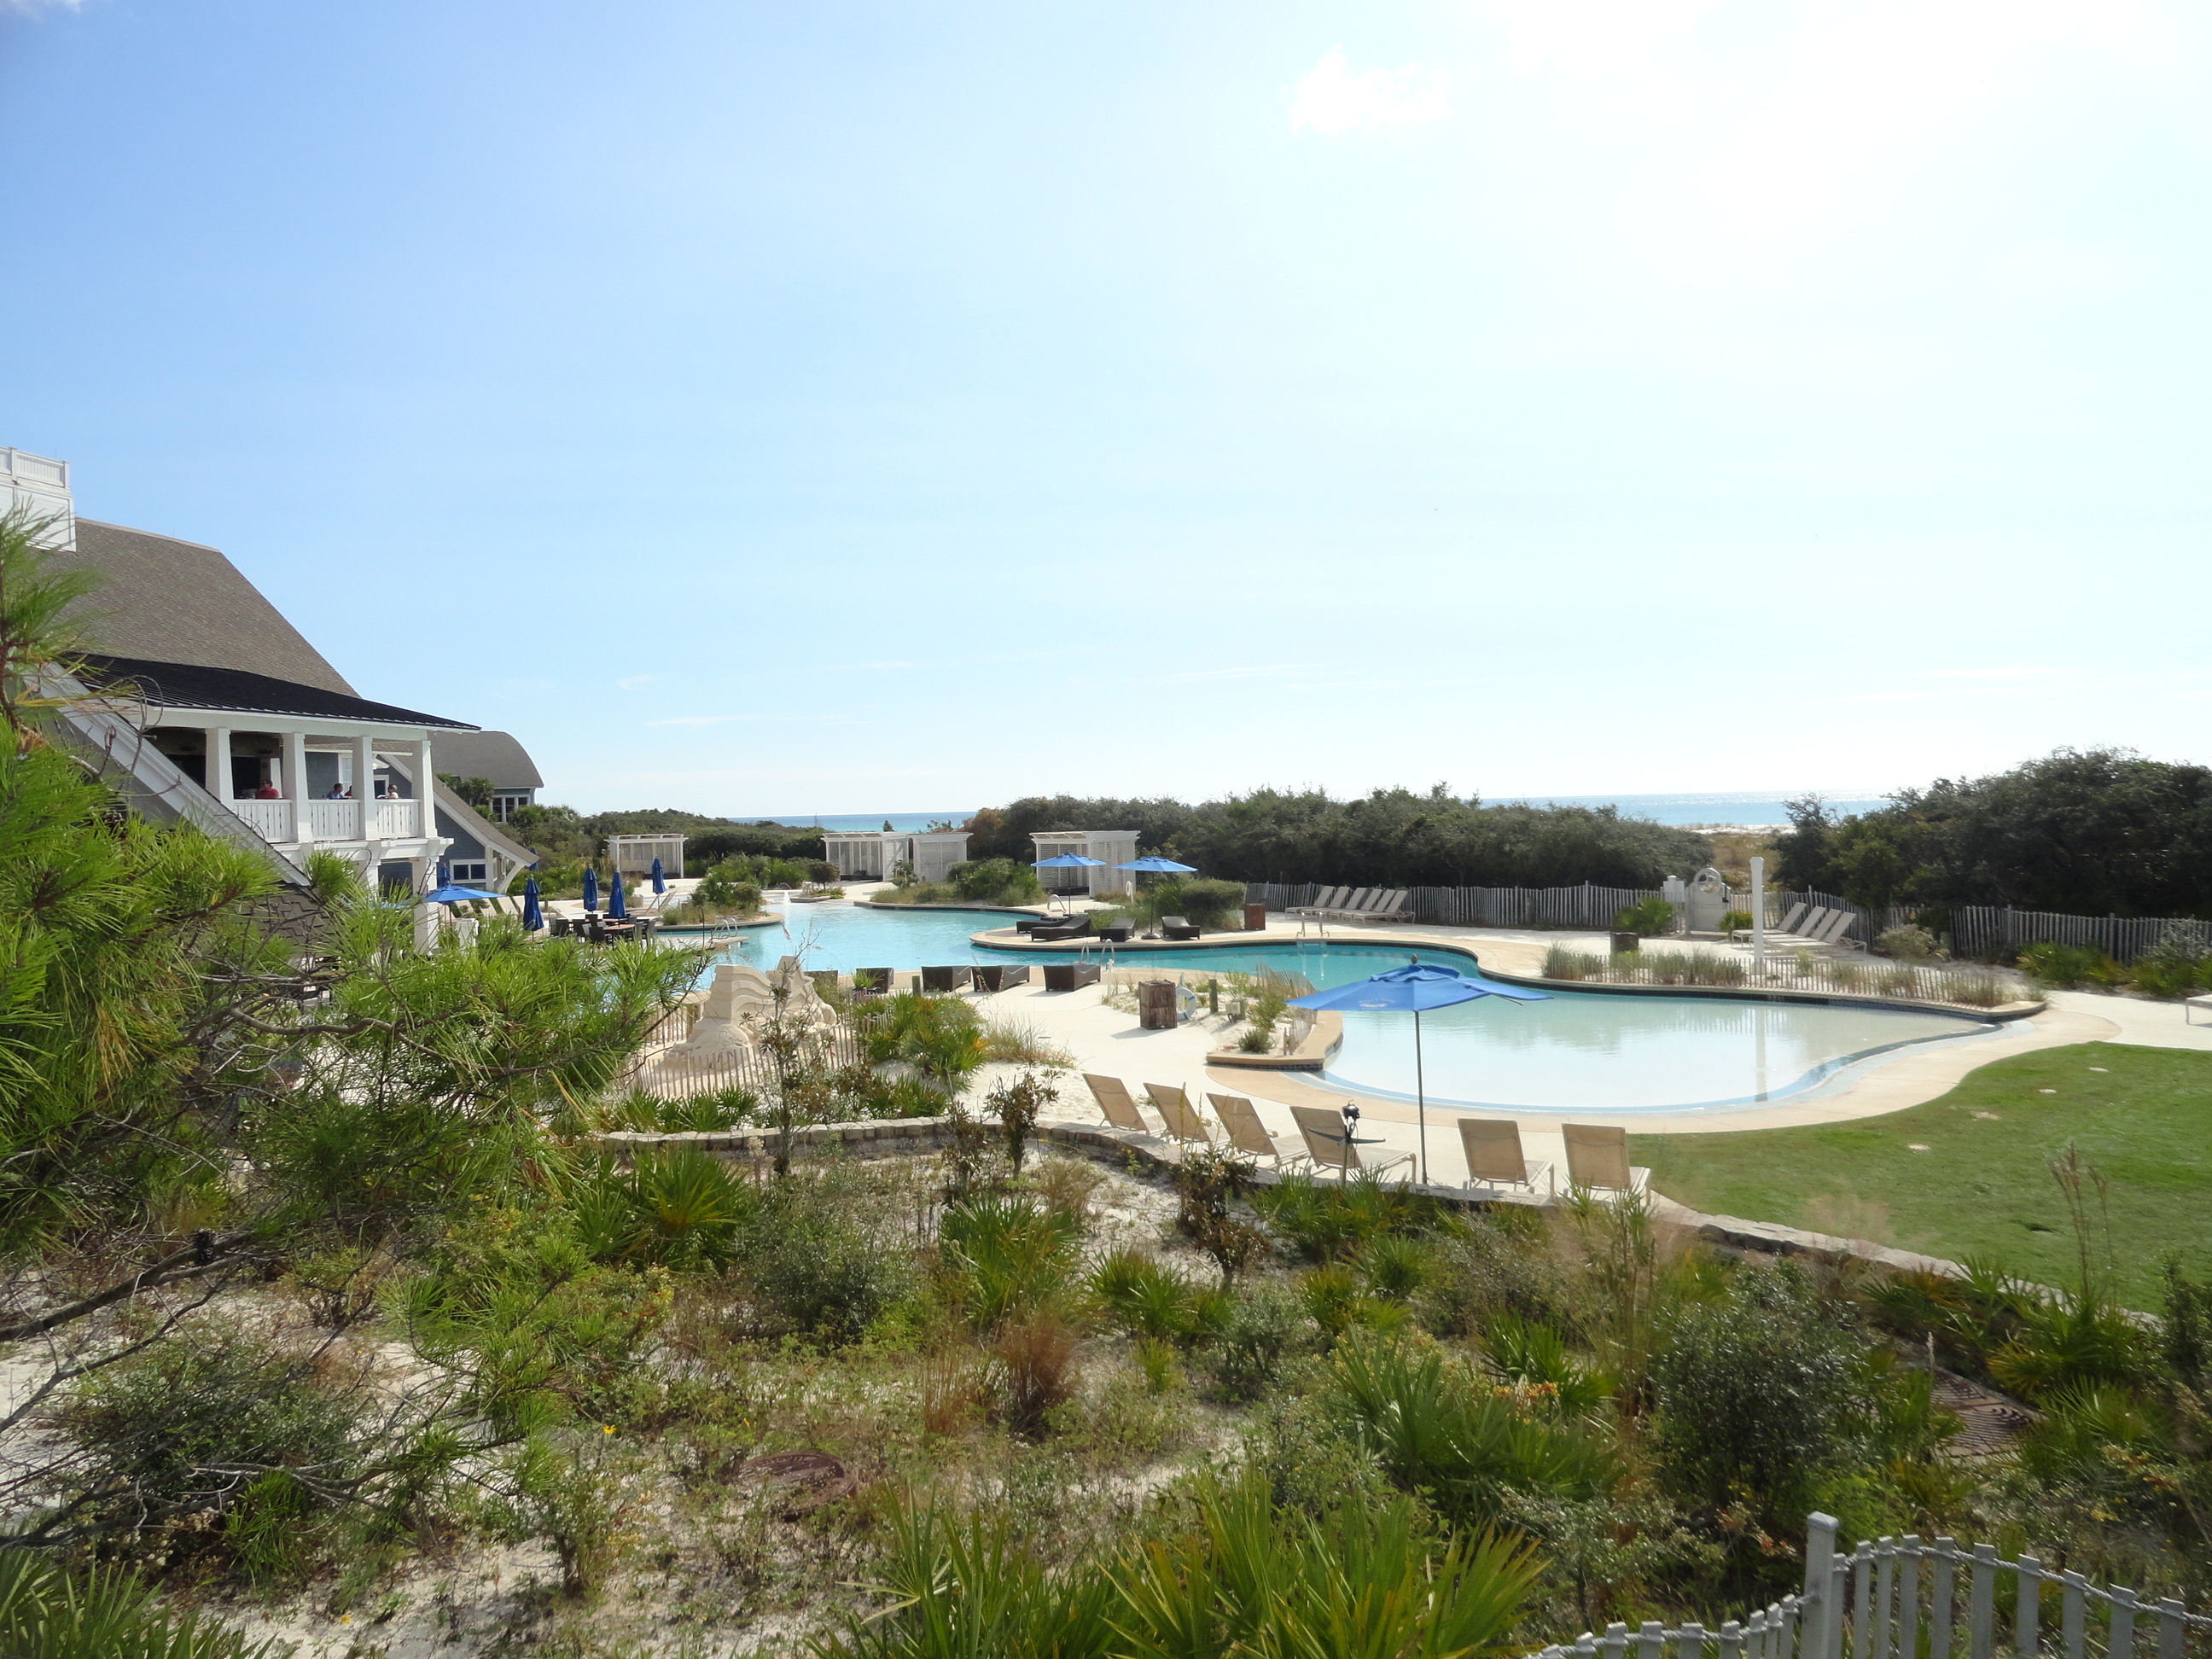 Watersound Beach Club - Homes On 30A ® 850-687-1064